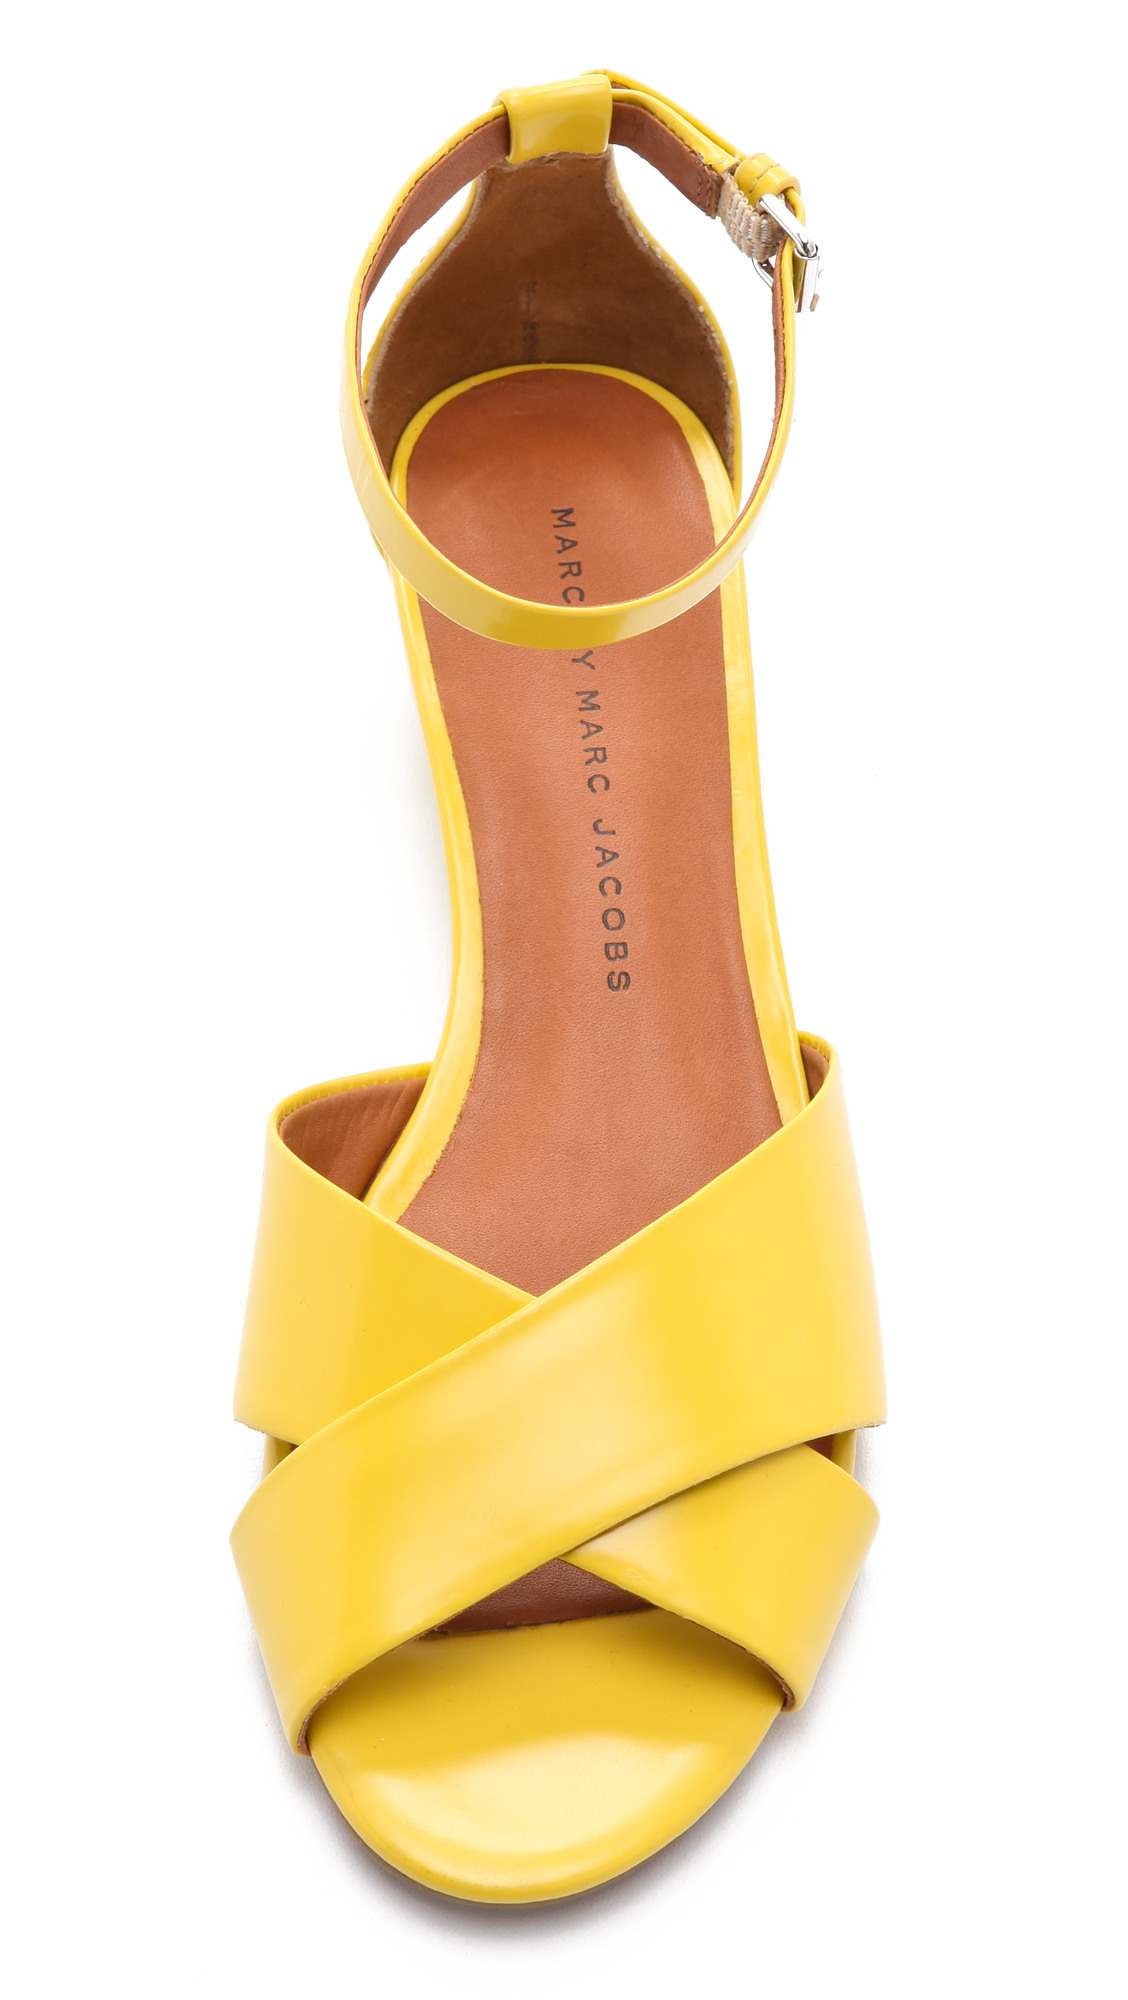 Lyst - Marc by marc jacobs Demi Wedge Sandals in Yellow